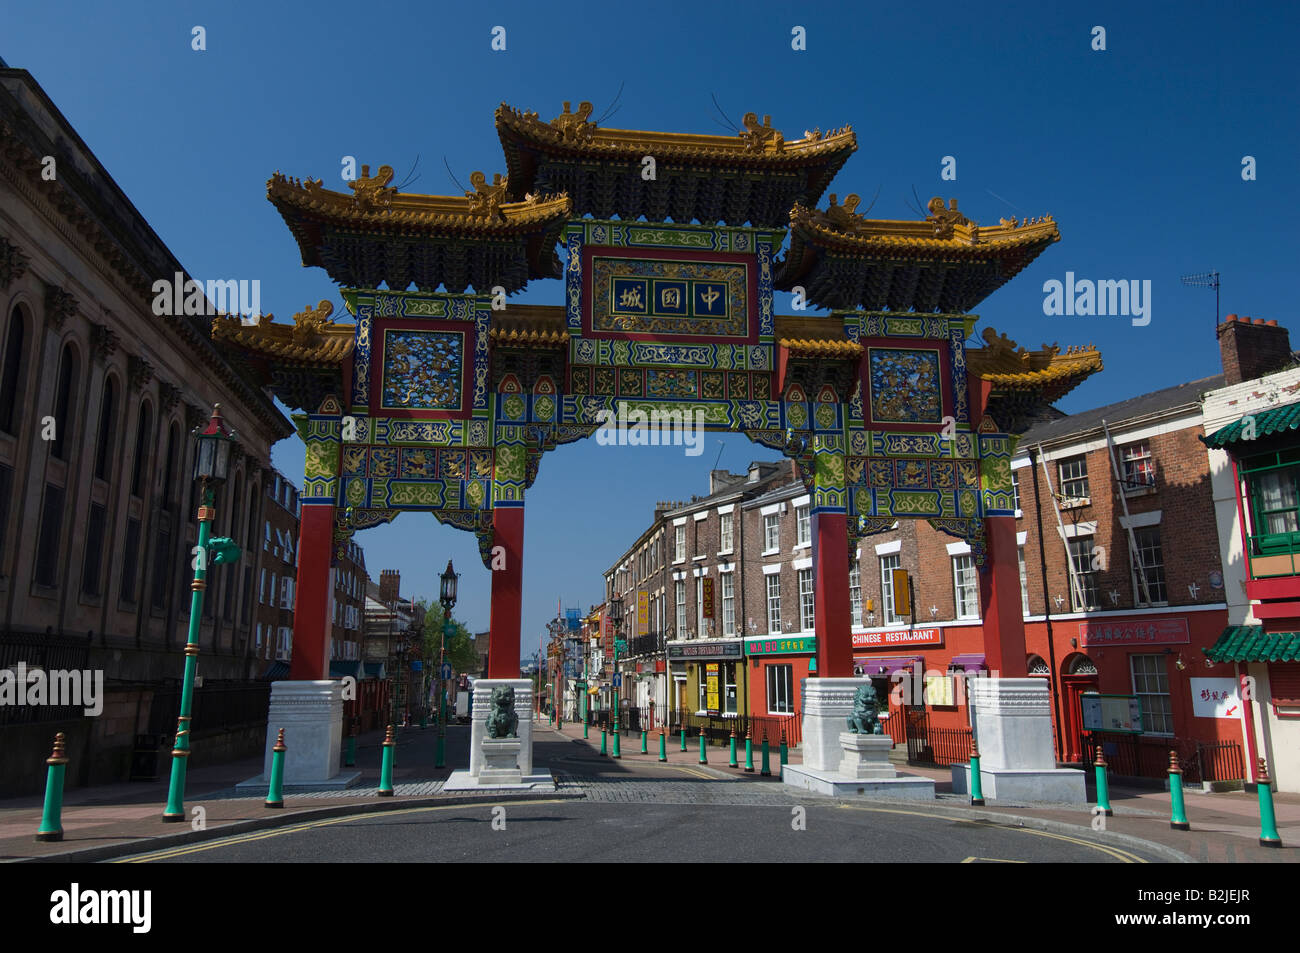 Entrance to Chinatown Berry street Liverpool painted arch way chinese arch Stock Photo